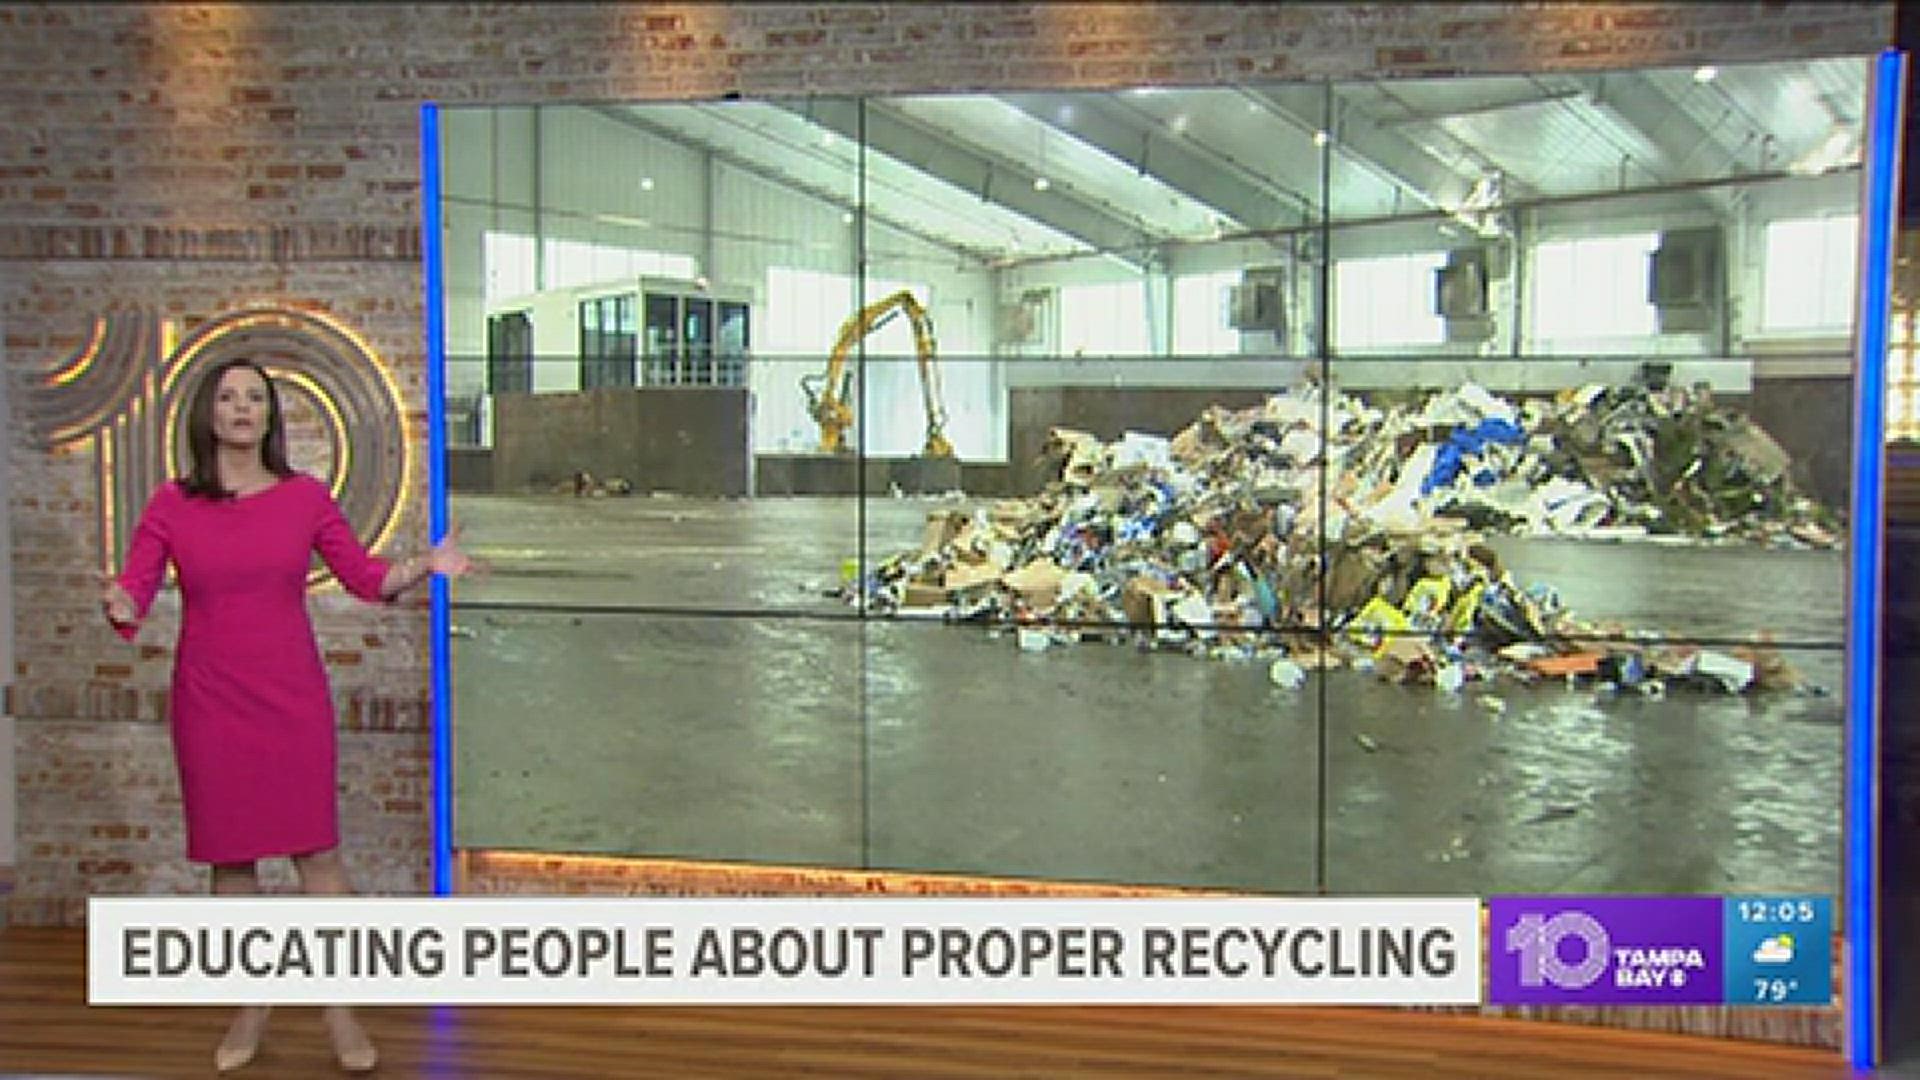 The department says there's an all-time high of contaminated recycling loads.